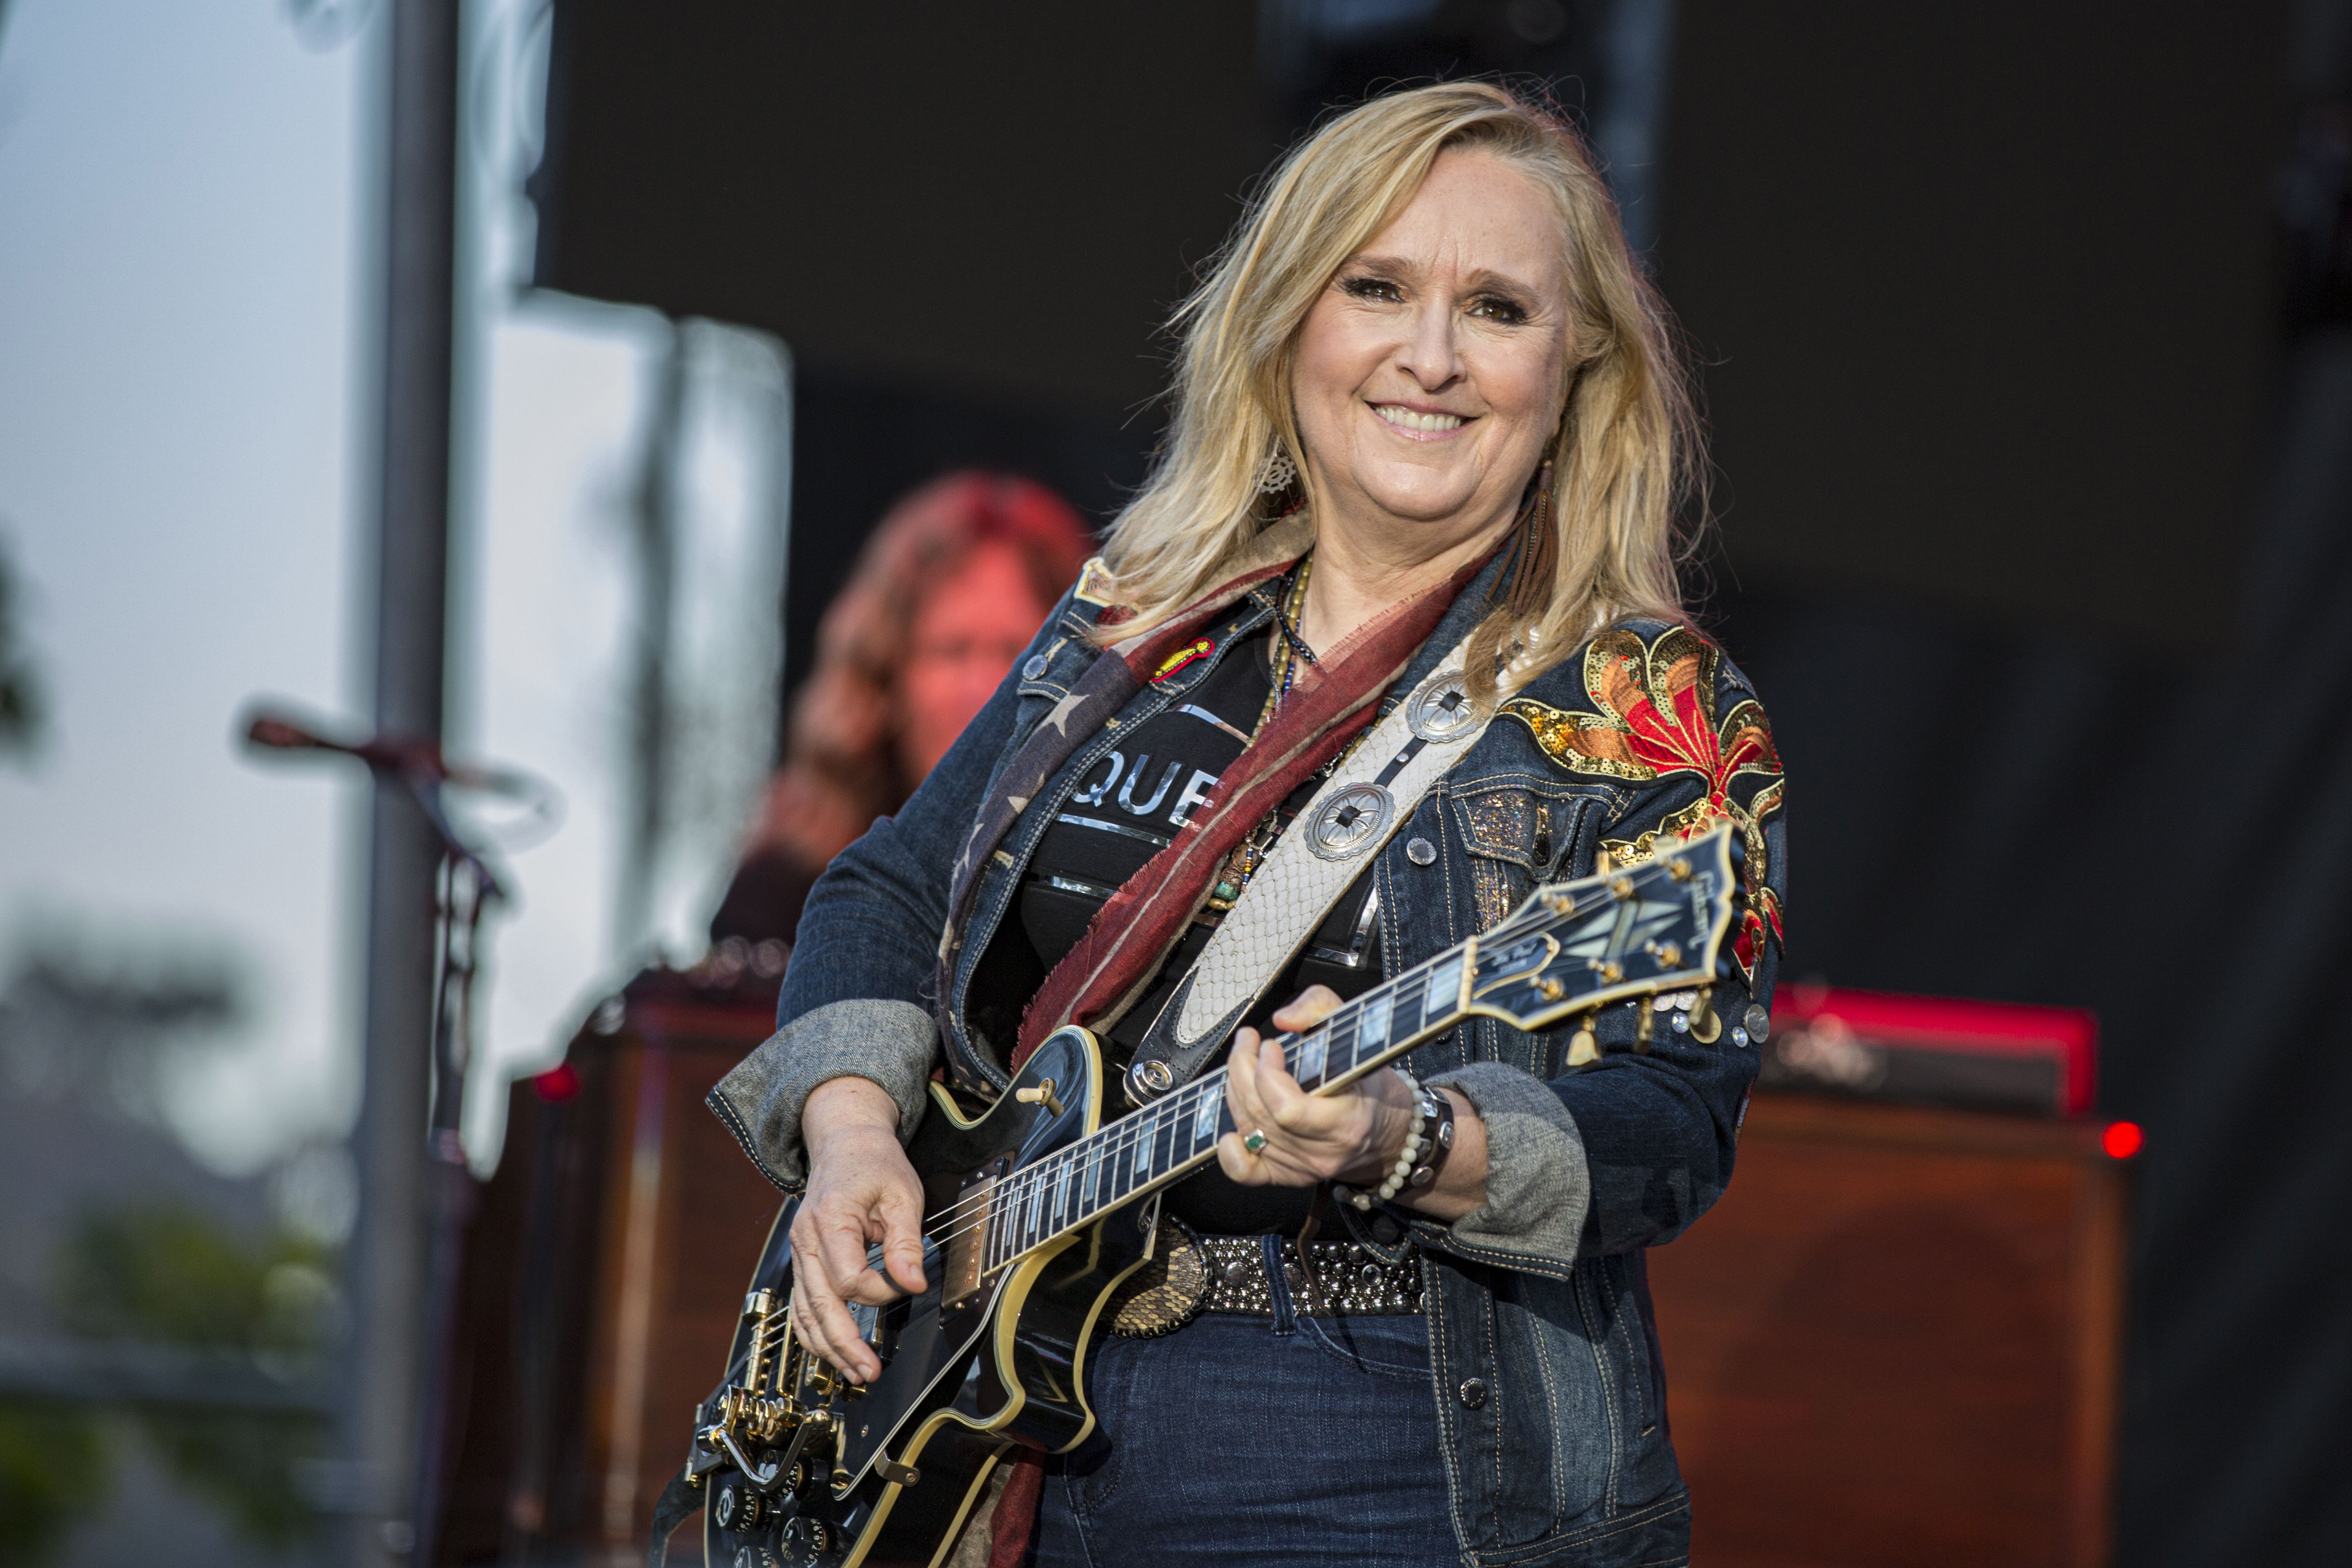 Melissa Etheridge performs on stage at San Diego Pride Festival 2019 on July 14, 2019 in San Diego, California. | Photo: Getty Images